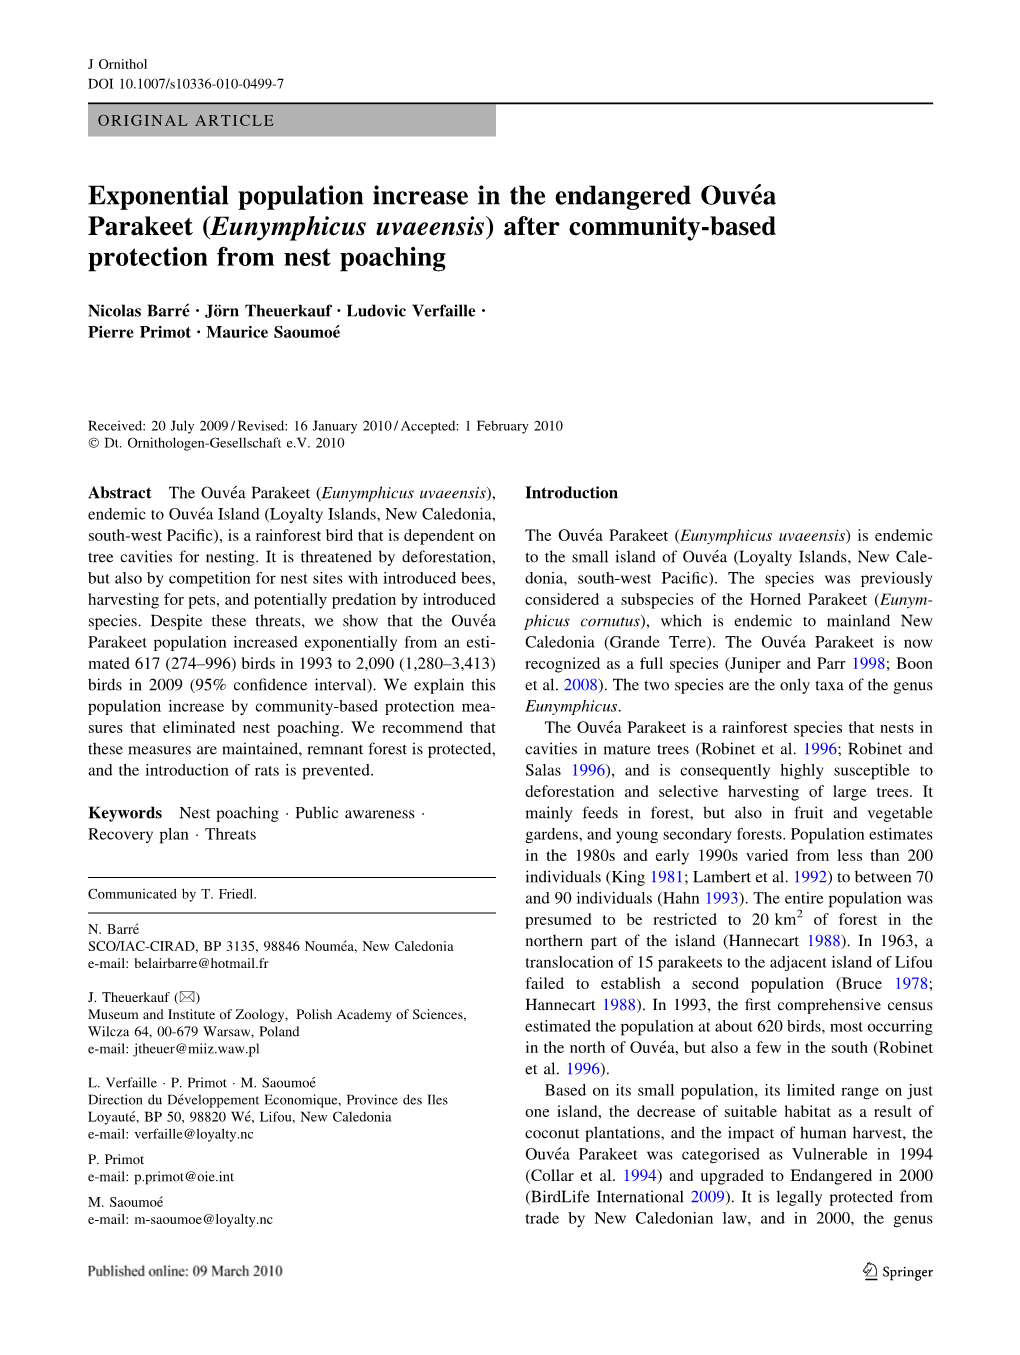 Exponential Population Increase in the Endangered Ouvéa Parakeet (Eunymphicus Uvaeensis) After Community-Based Protection From